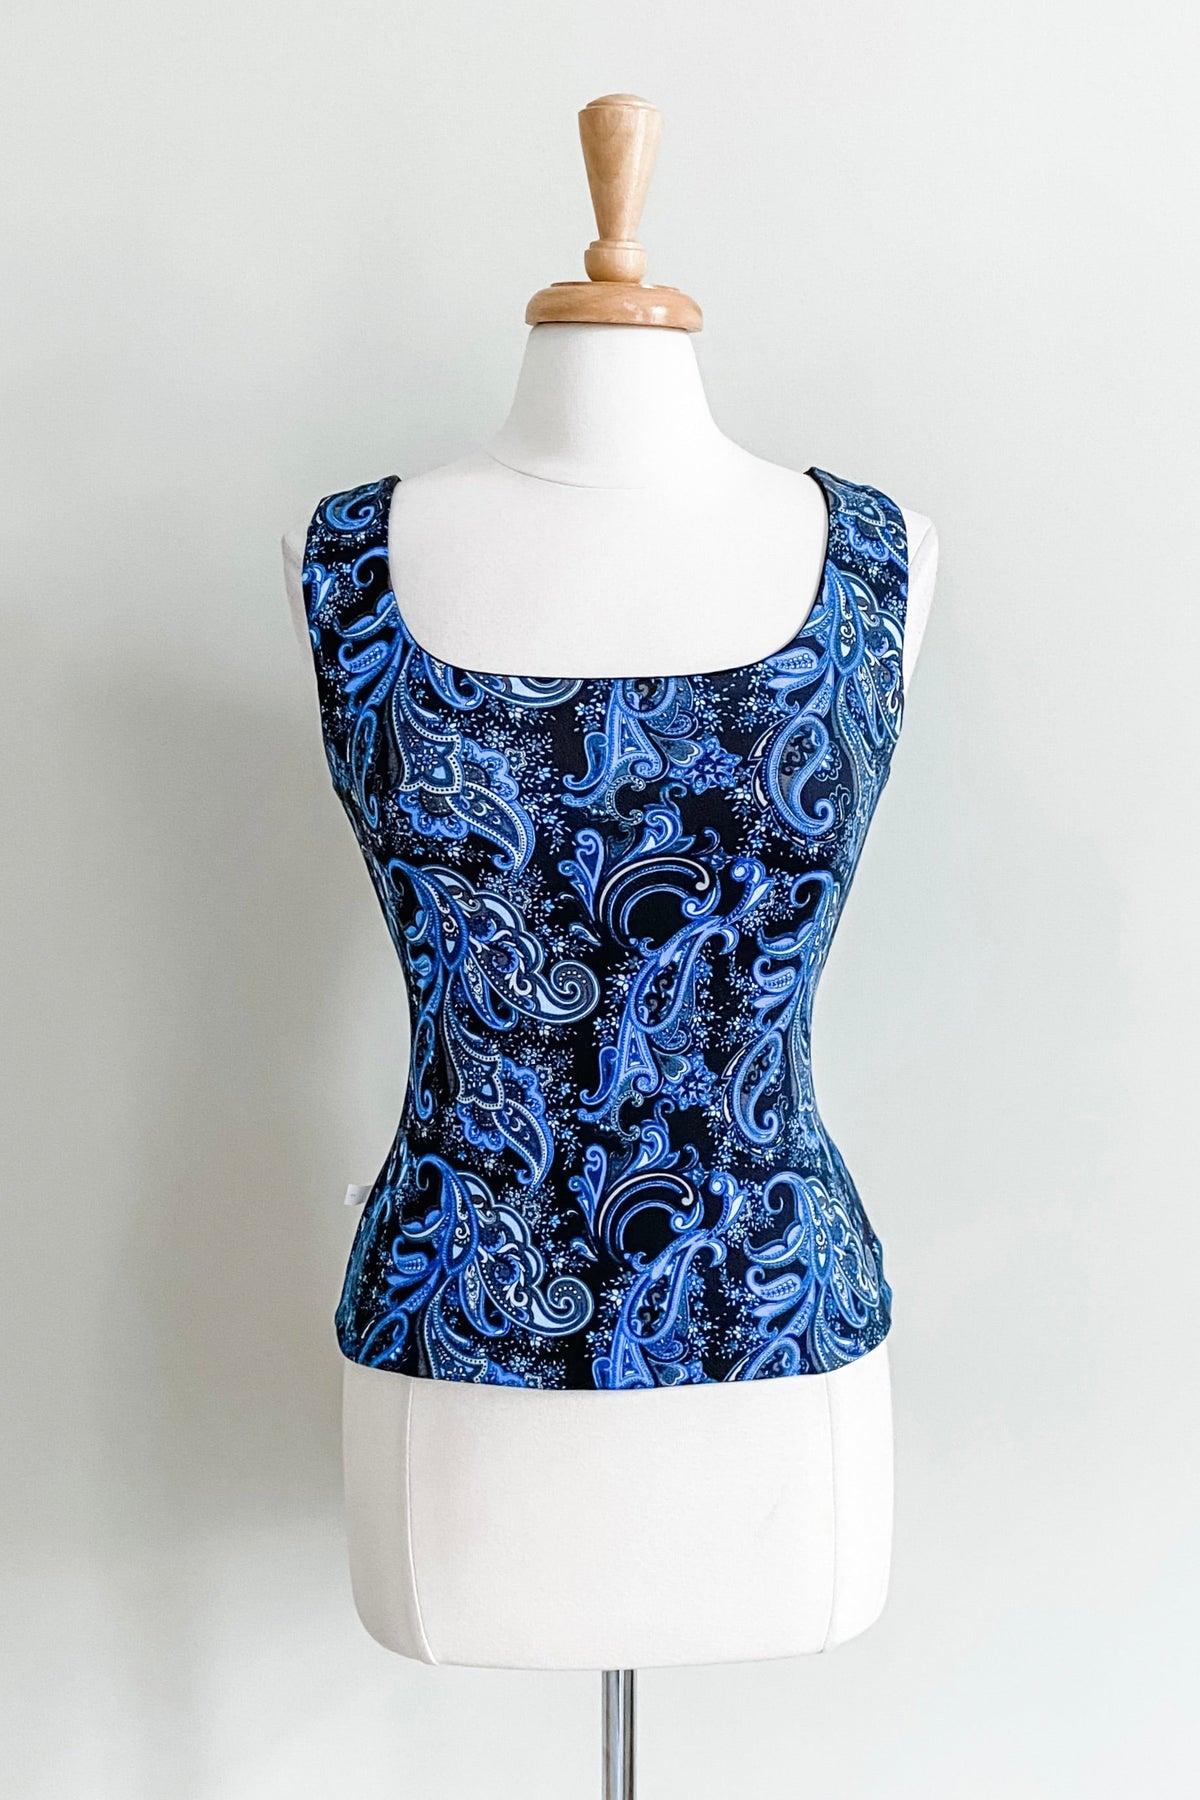 Diane Kroe Matching Reversible Bralette (Blue Paisley) - The Classic Capsule Collection